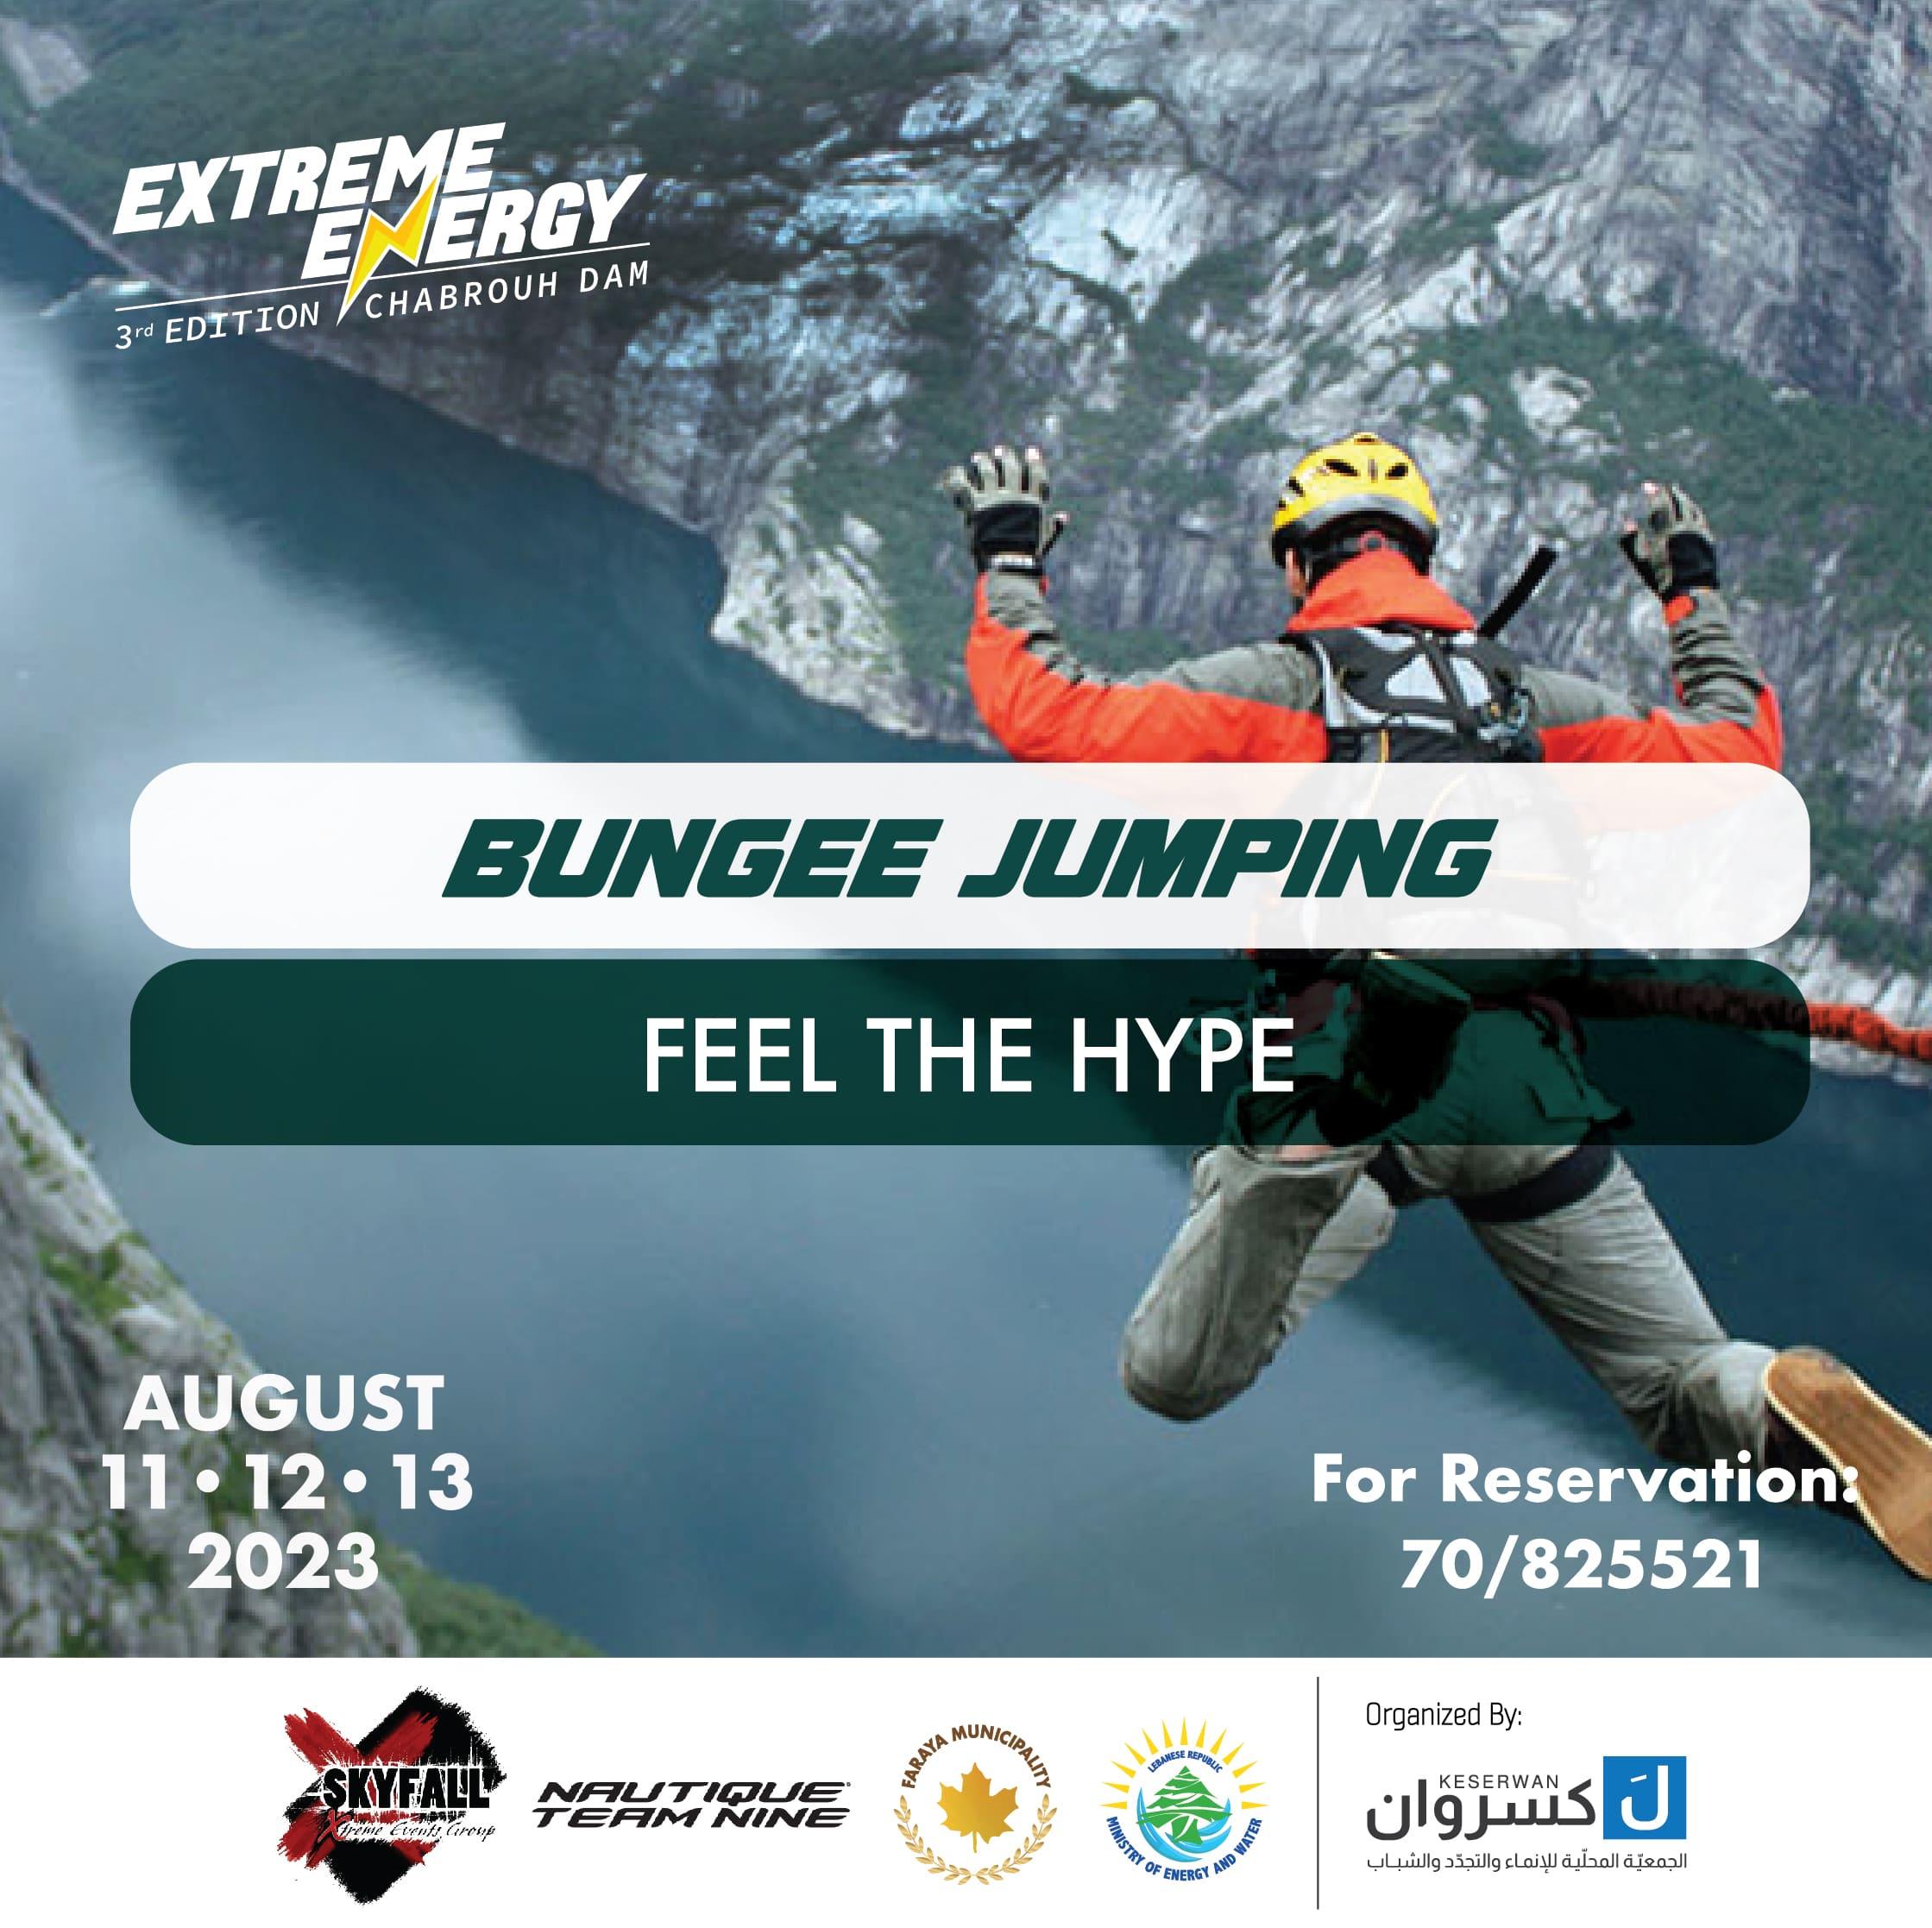 Bungee Jumping at Chabrouh Dam